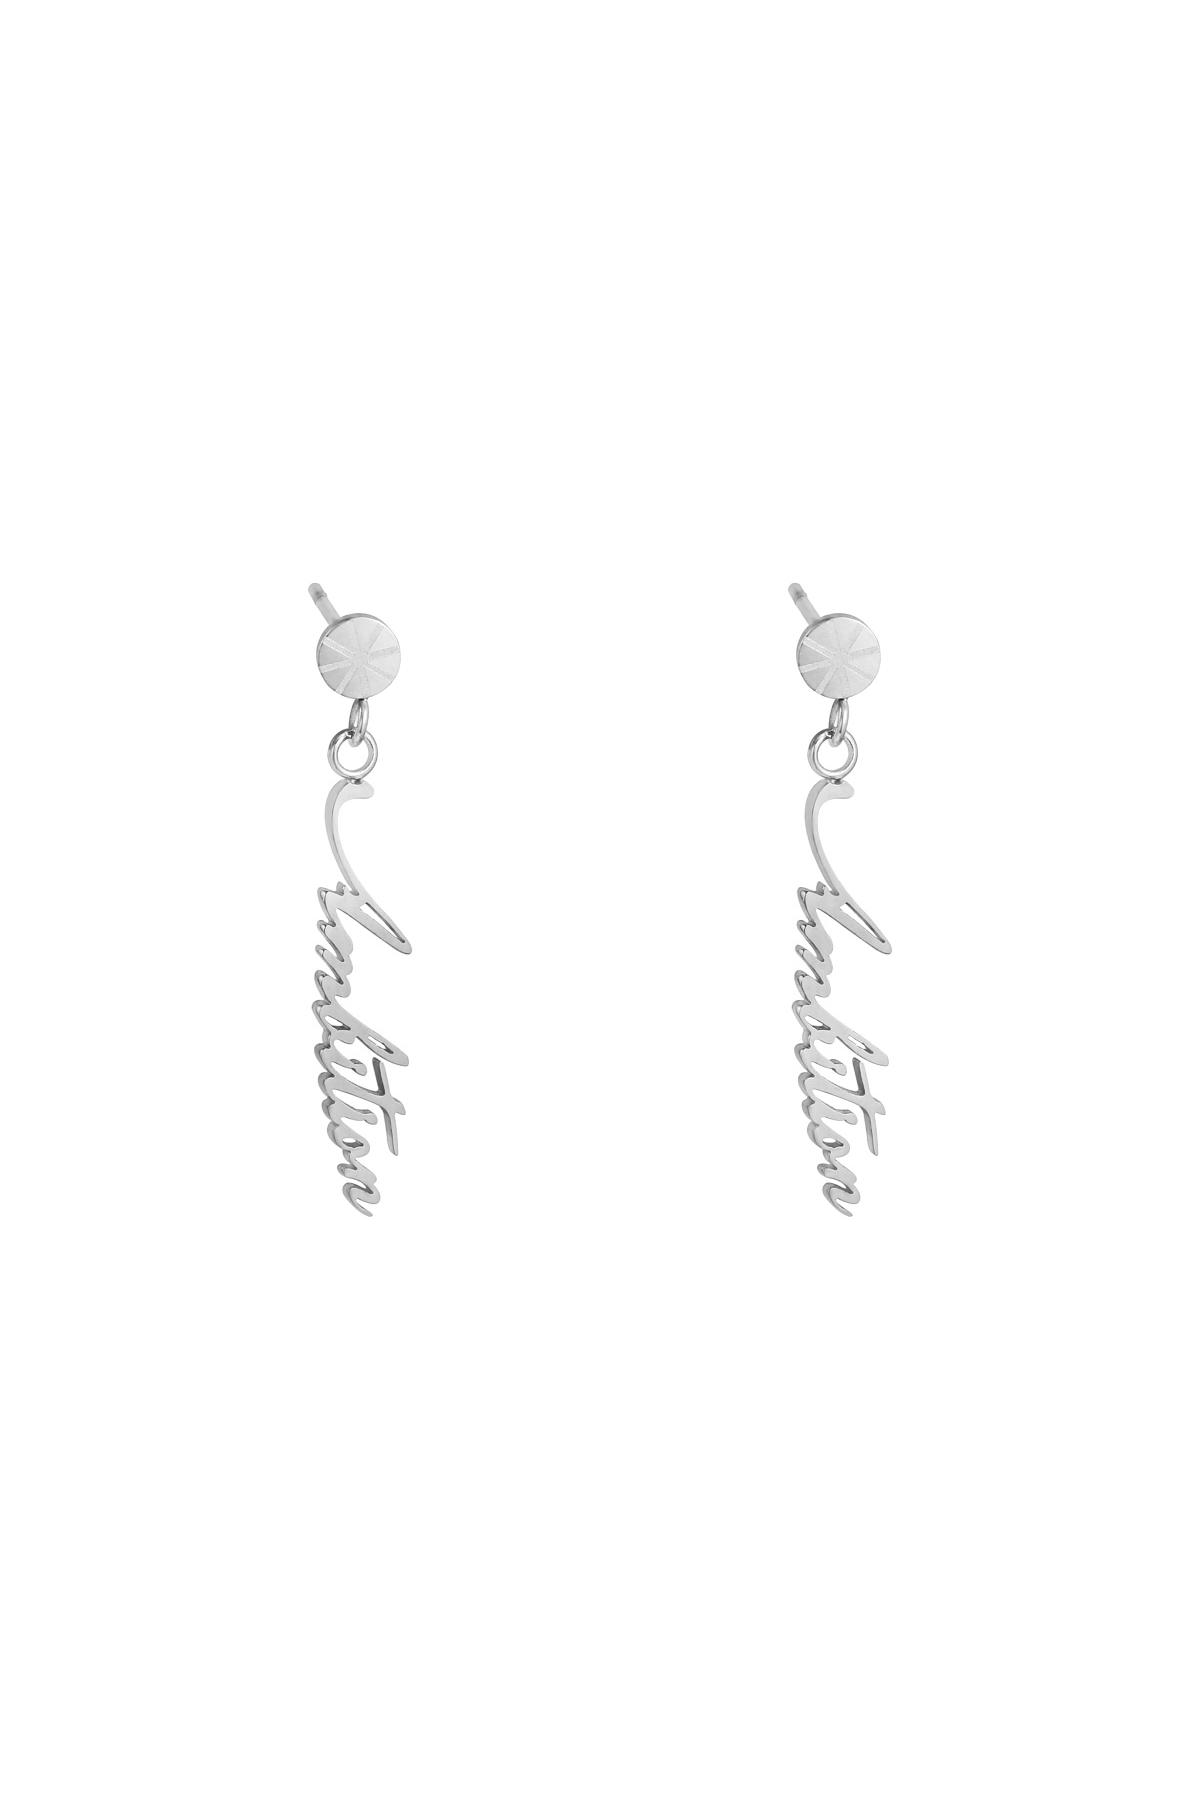 Earrings Ambition Silver Stainless Steel 